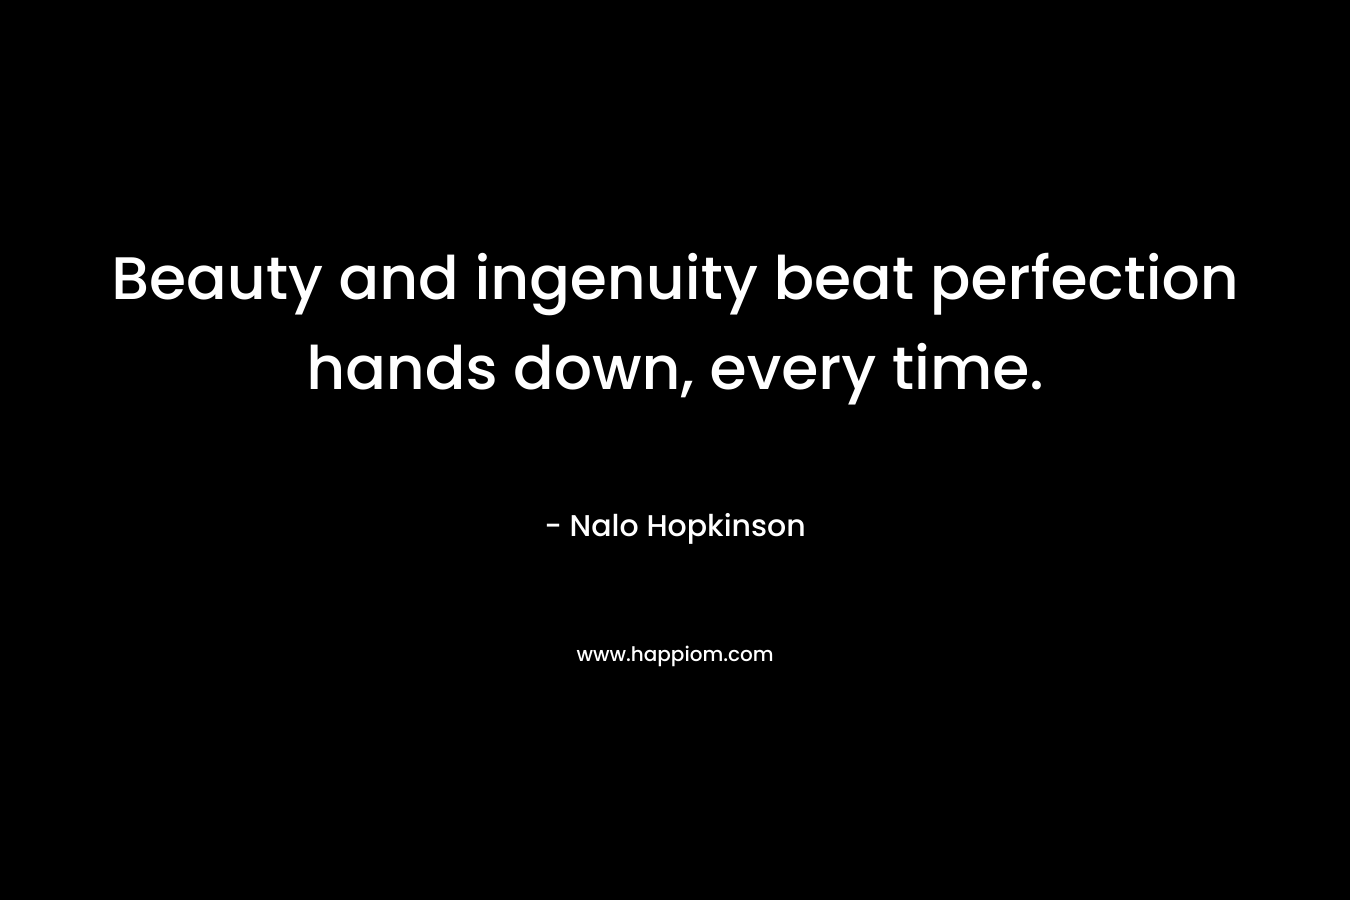 Beauty and ingenuity beat perfection hands down, every time. – Nalo Hopkinson